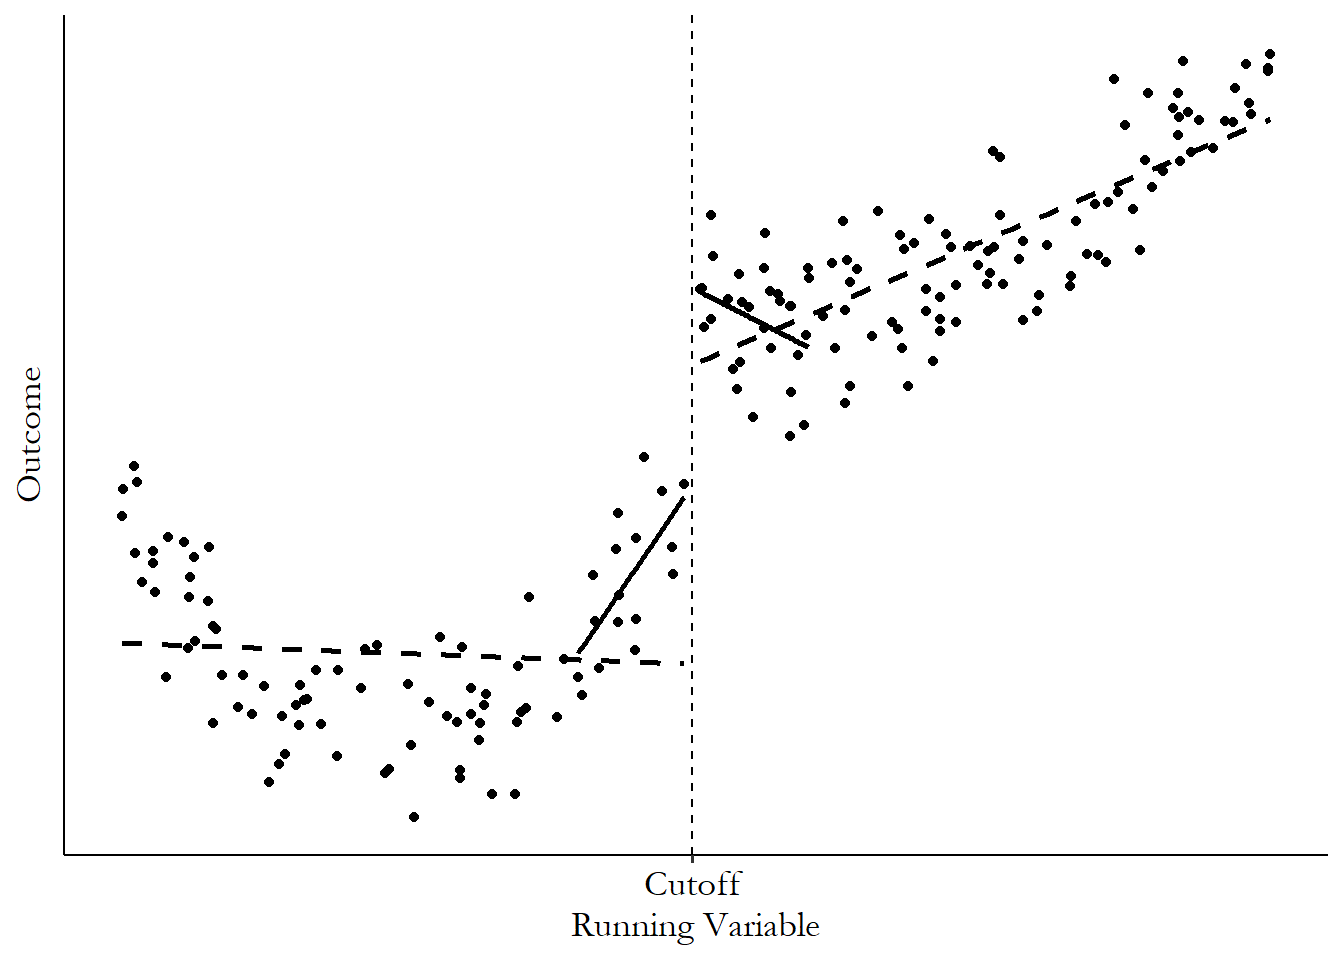 Scatterplot of data with a cutoff on the x-axis, with a clear jump at the cutoff. The data to the left follows a parabola, and a slight upward curve on the right, but both sides are fit with as straight line. The fit on the left is bad. There are also straight lines fit using only the data near the cutoff, for which the fit is much better.